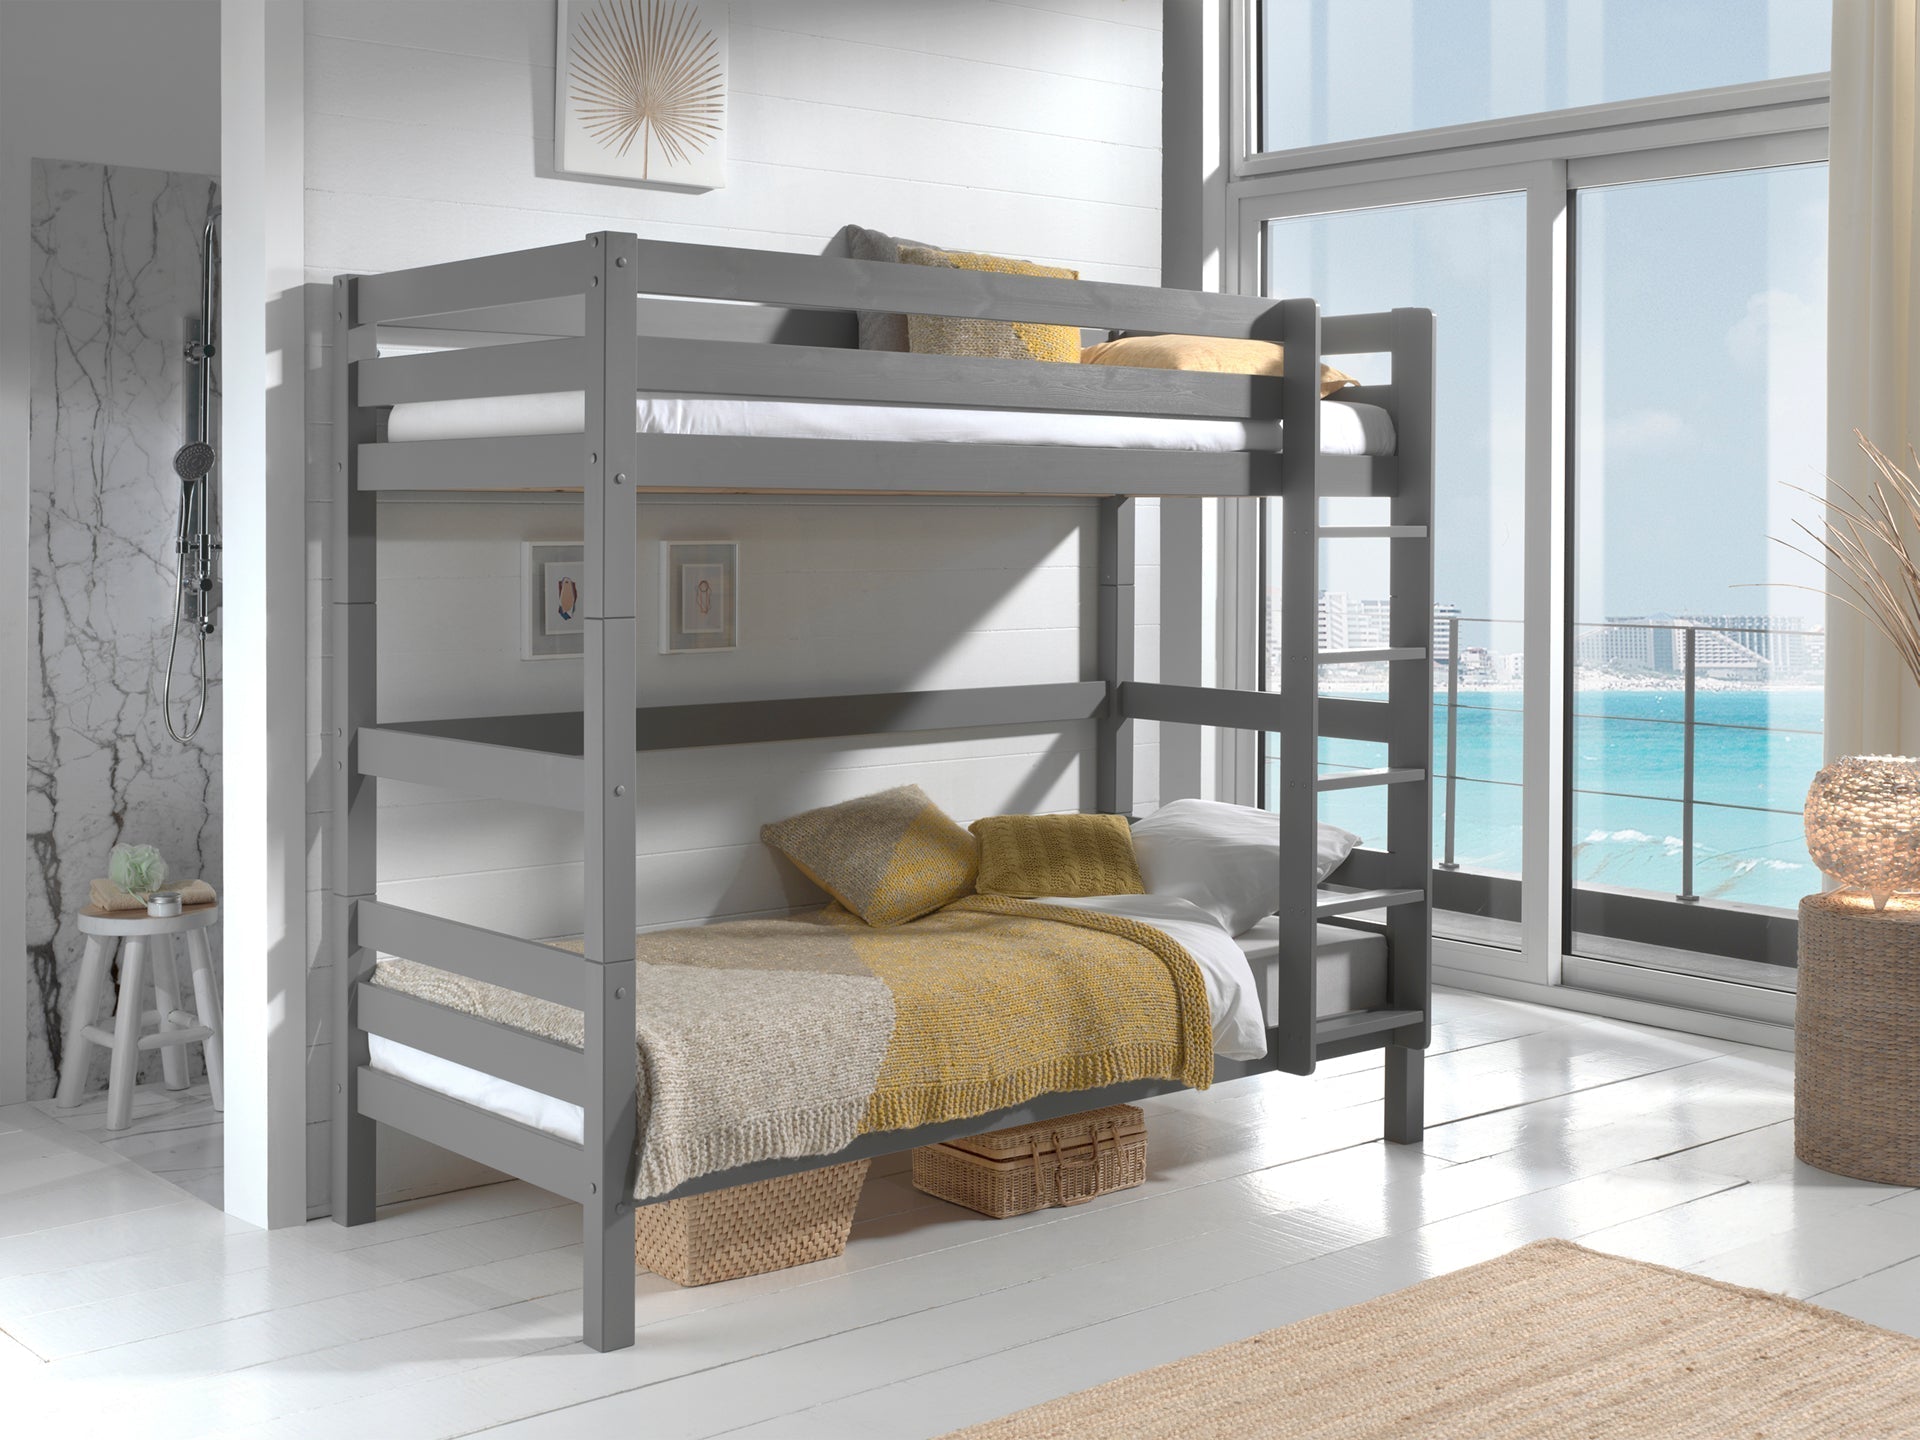 Vipack Pino Kids Bunk Bed - 180cm Height - Grey